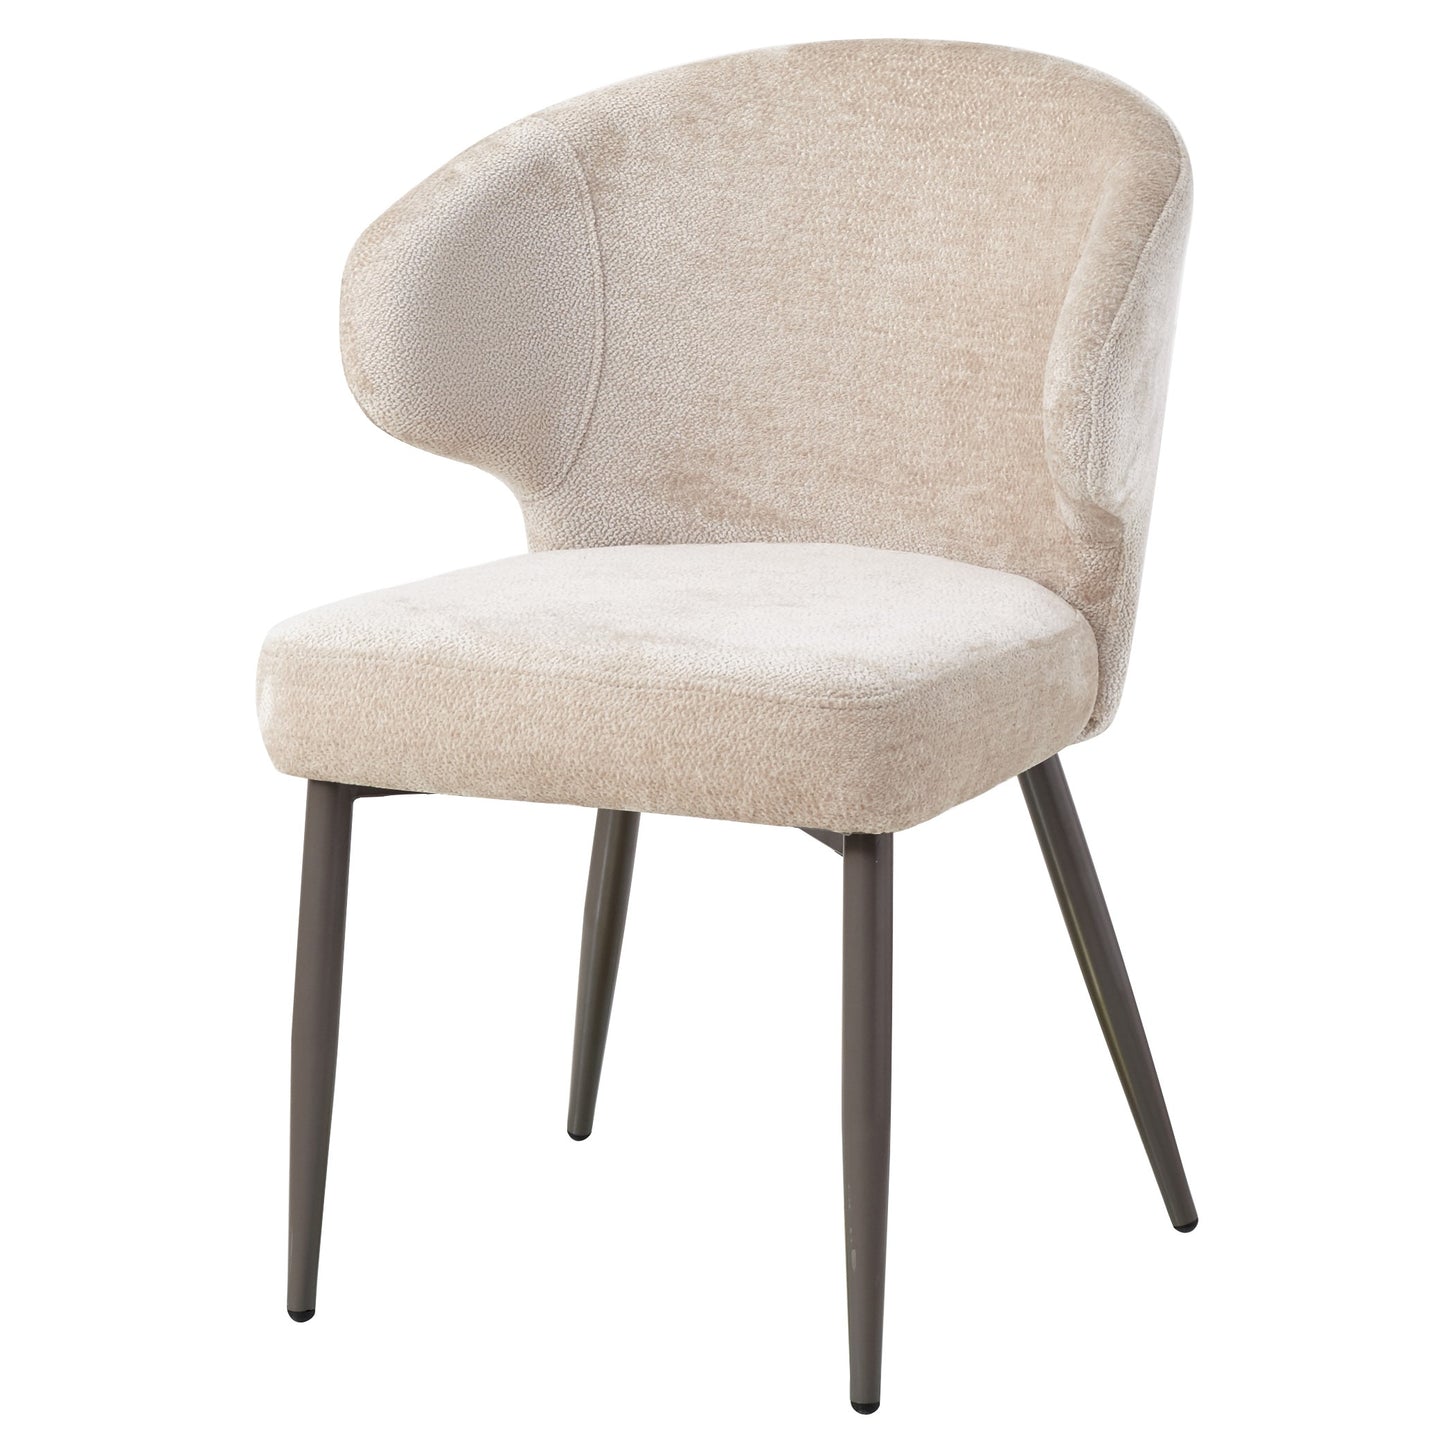 Ares Grey dining chair aphrodite 7 mocco clay leg